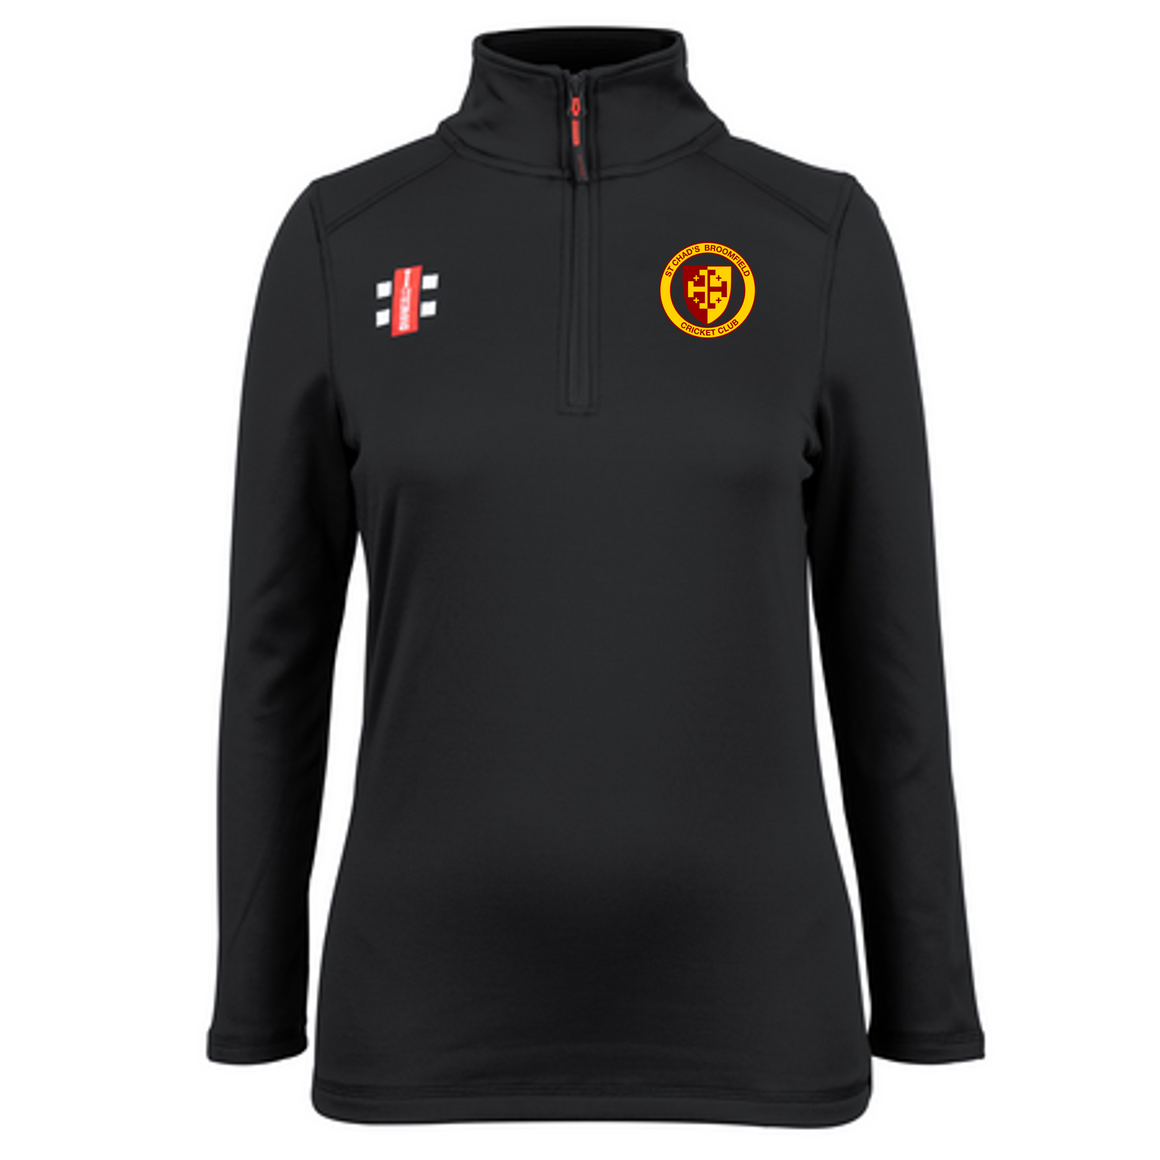 St Chads Womens Thermo Fleece